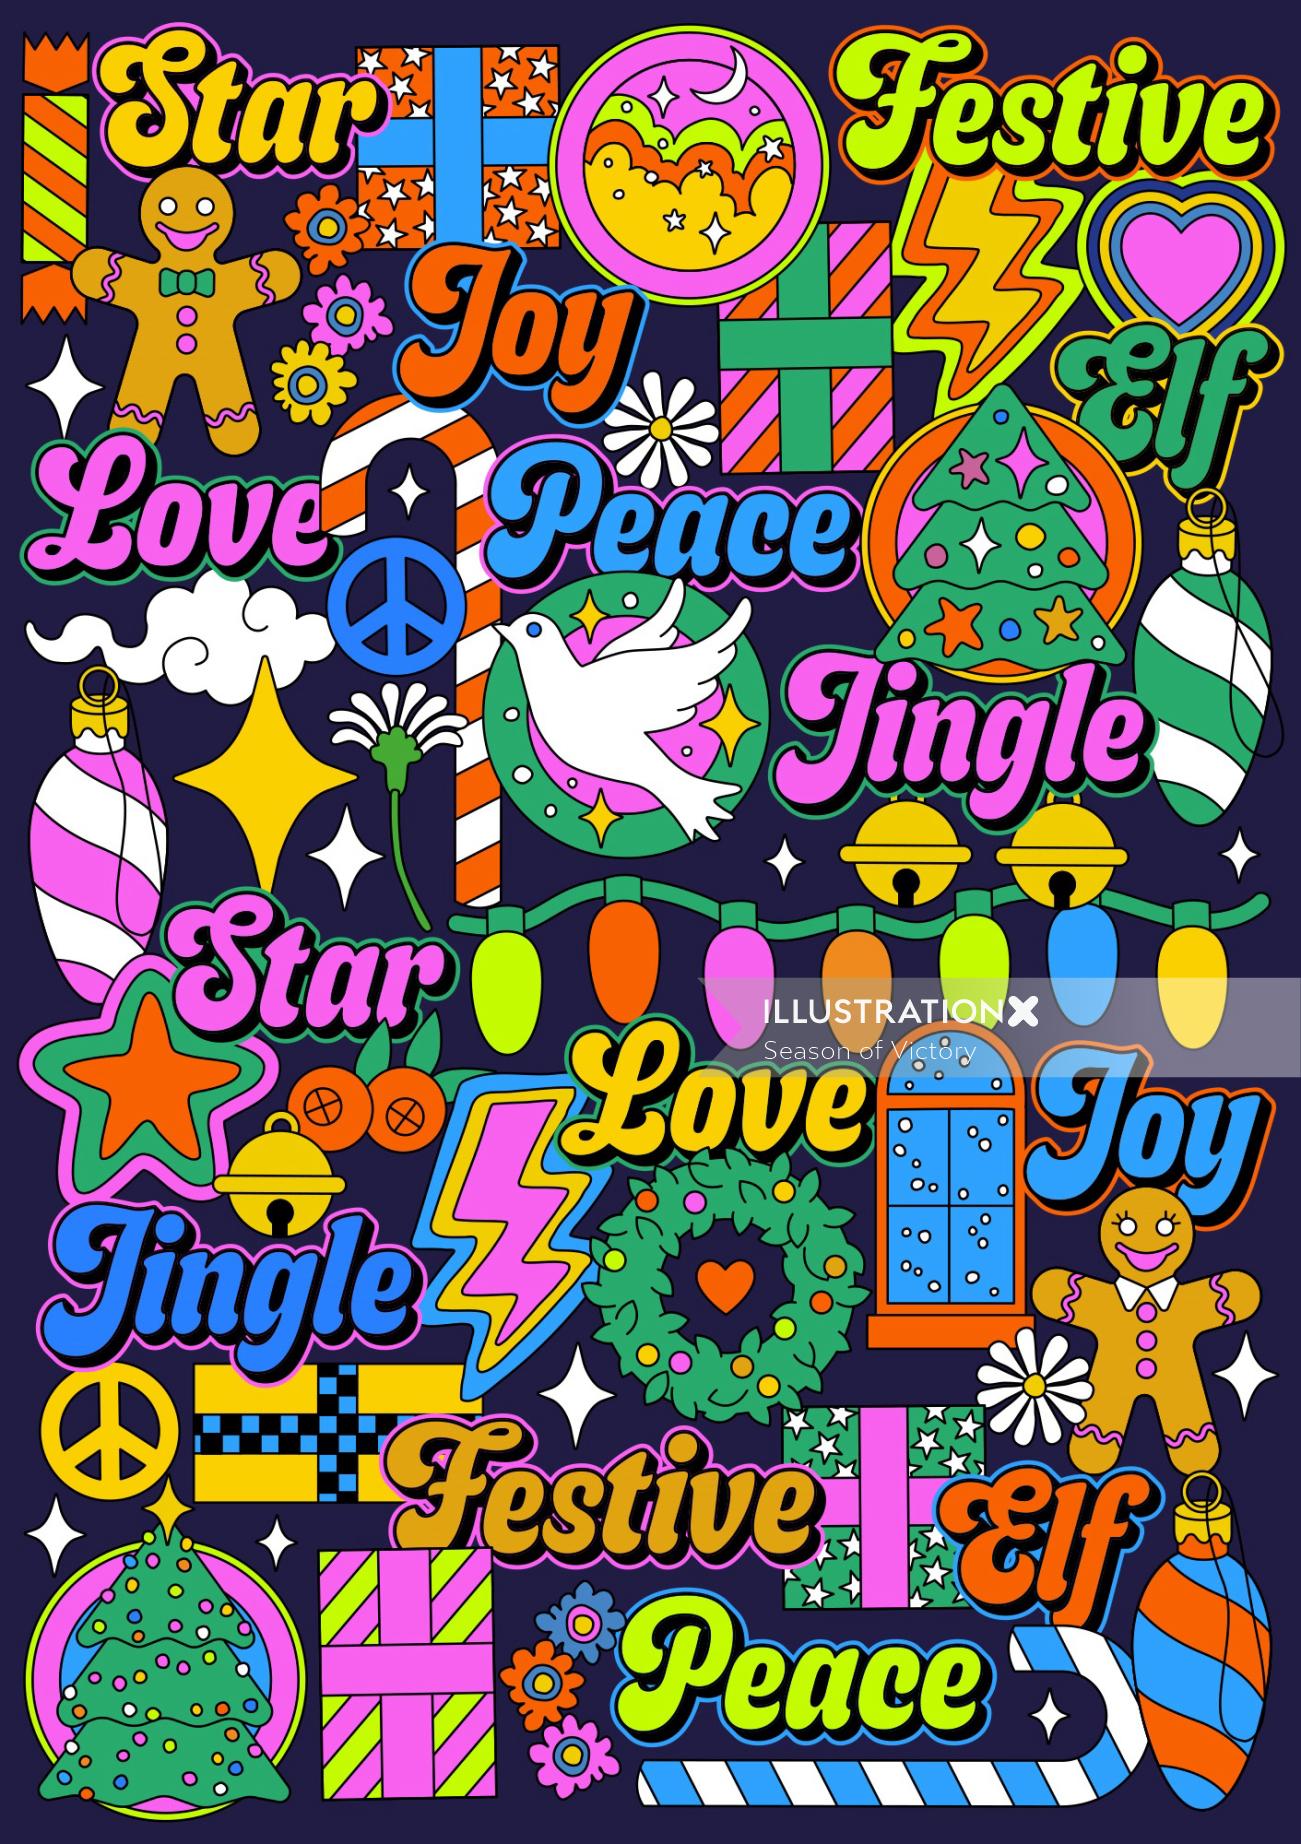 Neon-colored modern festive pattern with a Christmas motif